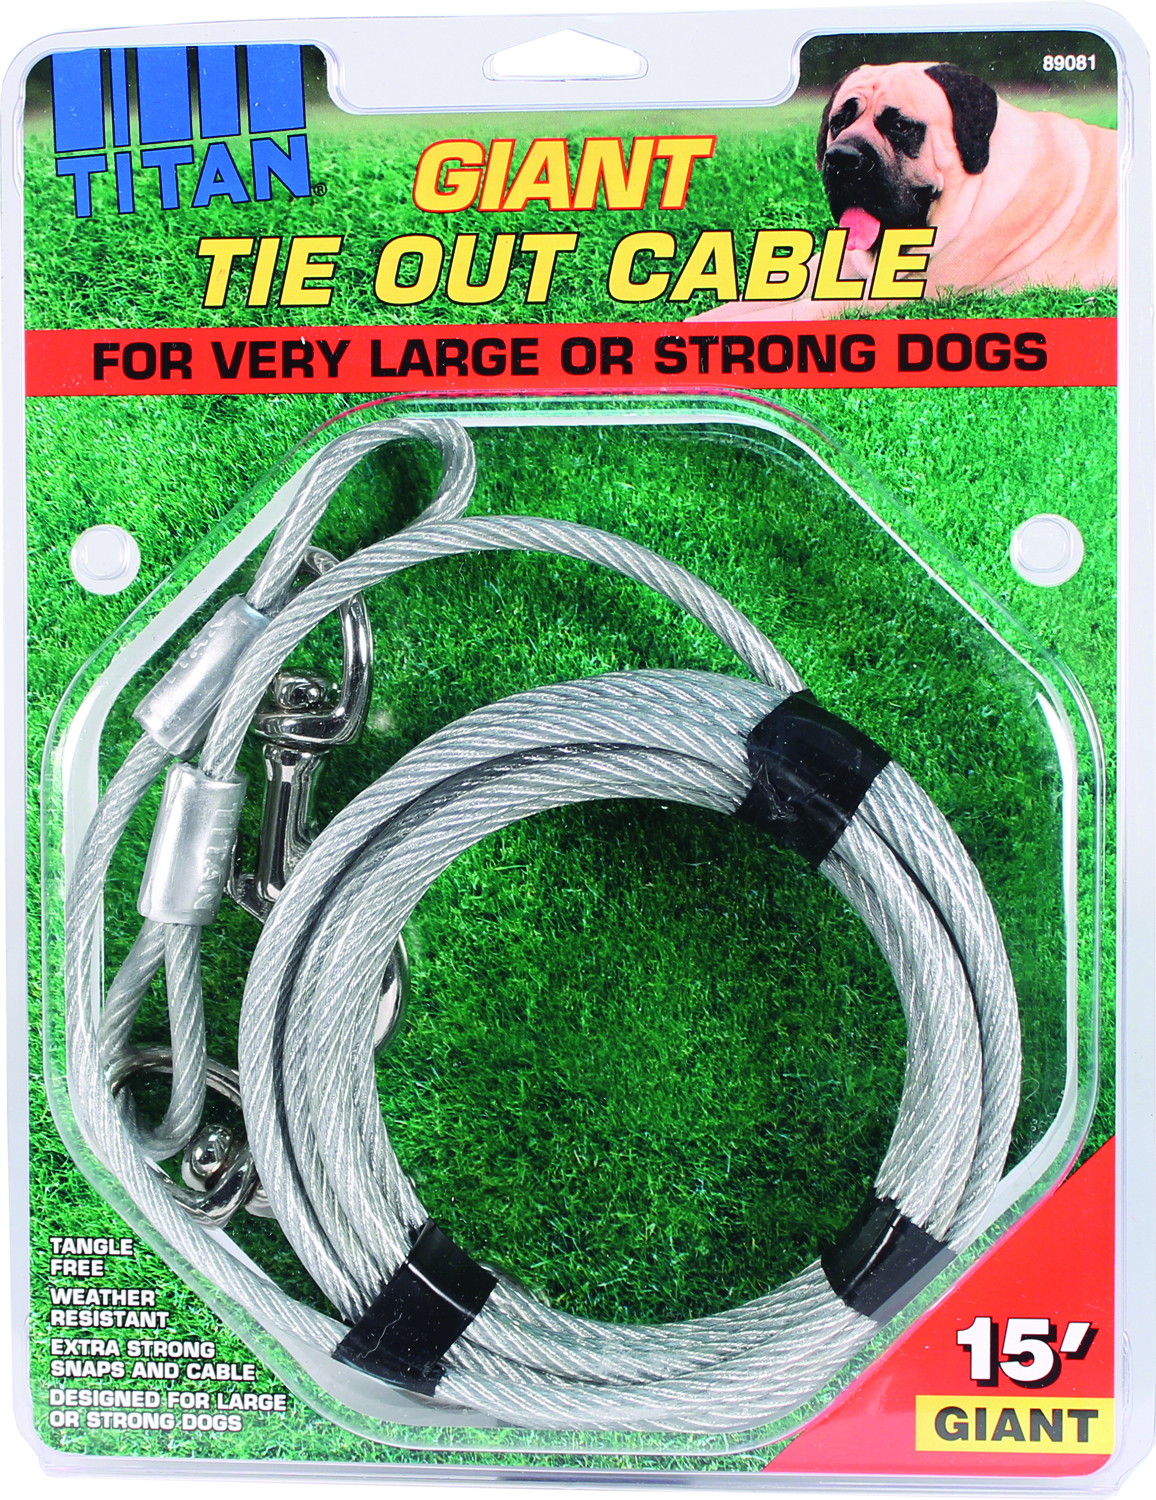 TITAN DOG TIE OUT CABLE